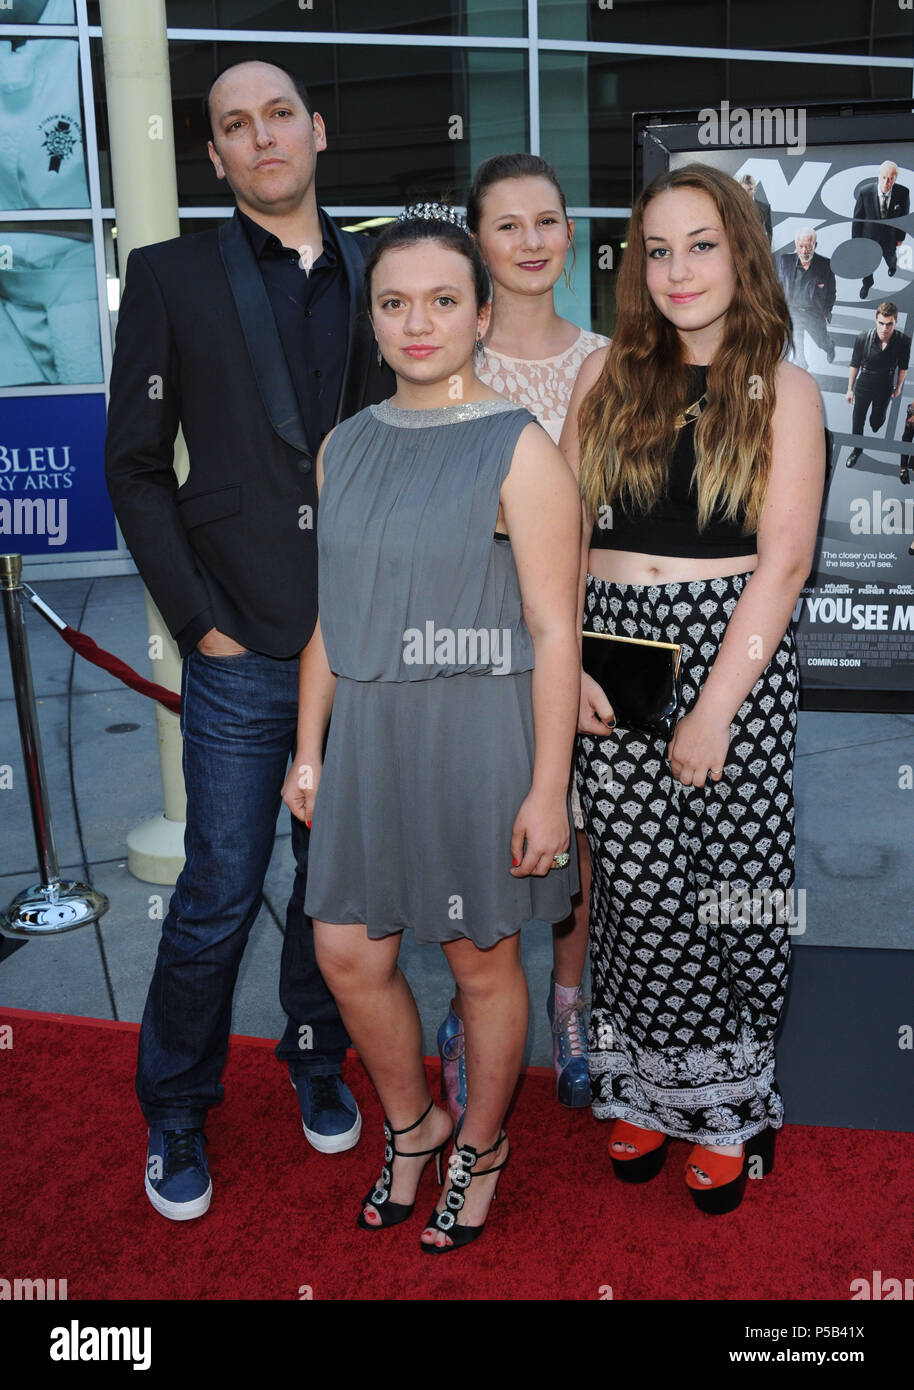 Louis Leterrier and family  at  the Los Angeles special screening of Now You See Me at the Arclight theatre in Los Angeles. Louis Leterrier and family  ------------- Red Carpet Event, Vertical, USA, Film Industry, Celebrities,  Photography, Bestof, Arts Culture and Entertainment, Topix Celebrities fashion /  Vertical, Best of, Event in Hollywood Life - California,  Red Carpet and backstage, USA, Film Industry, Celebrities,  movie celebrities, TV celebrities, Music celebrities, Photography, Bestof, Arts Culture and Entertainment,  Topix, vertical,  family from from the year , 2013, inquiry tsun Stock Photo